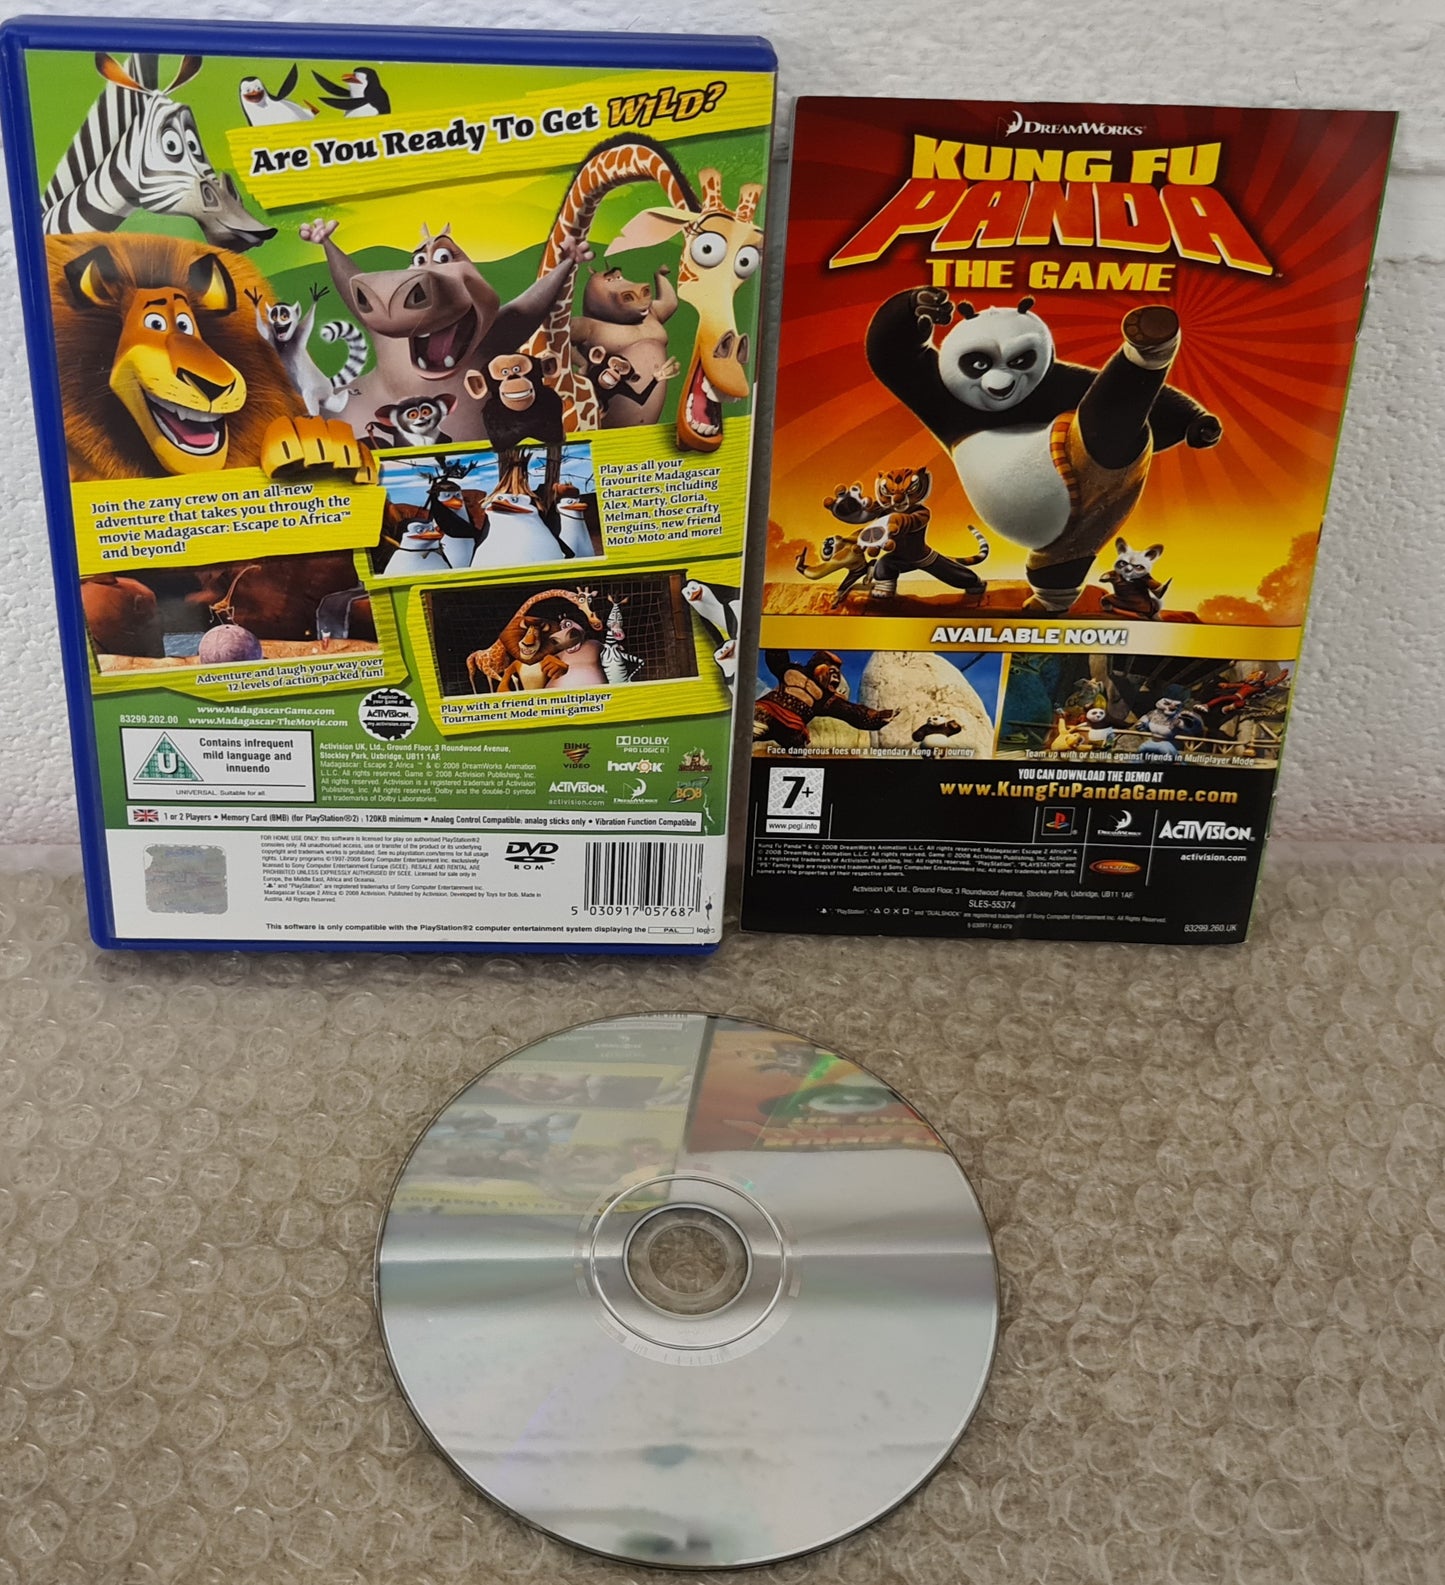 Madagascar Escape 2 Africa Sony Playstation 2 (PS2) Game